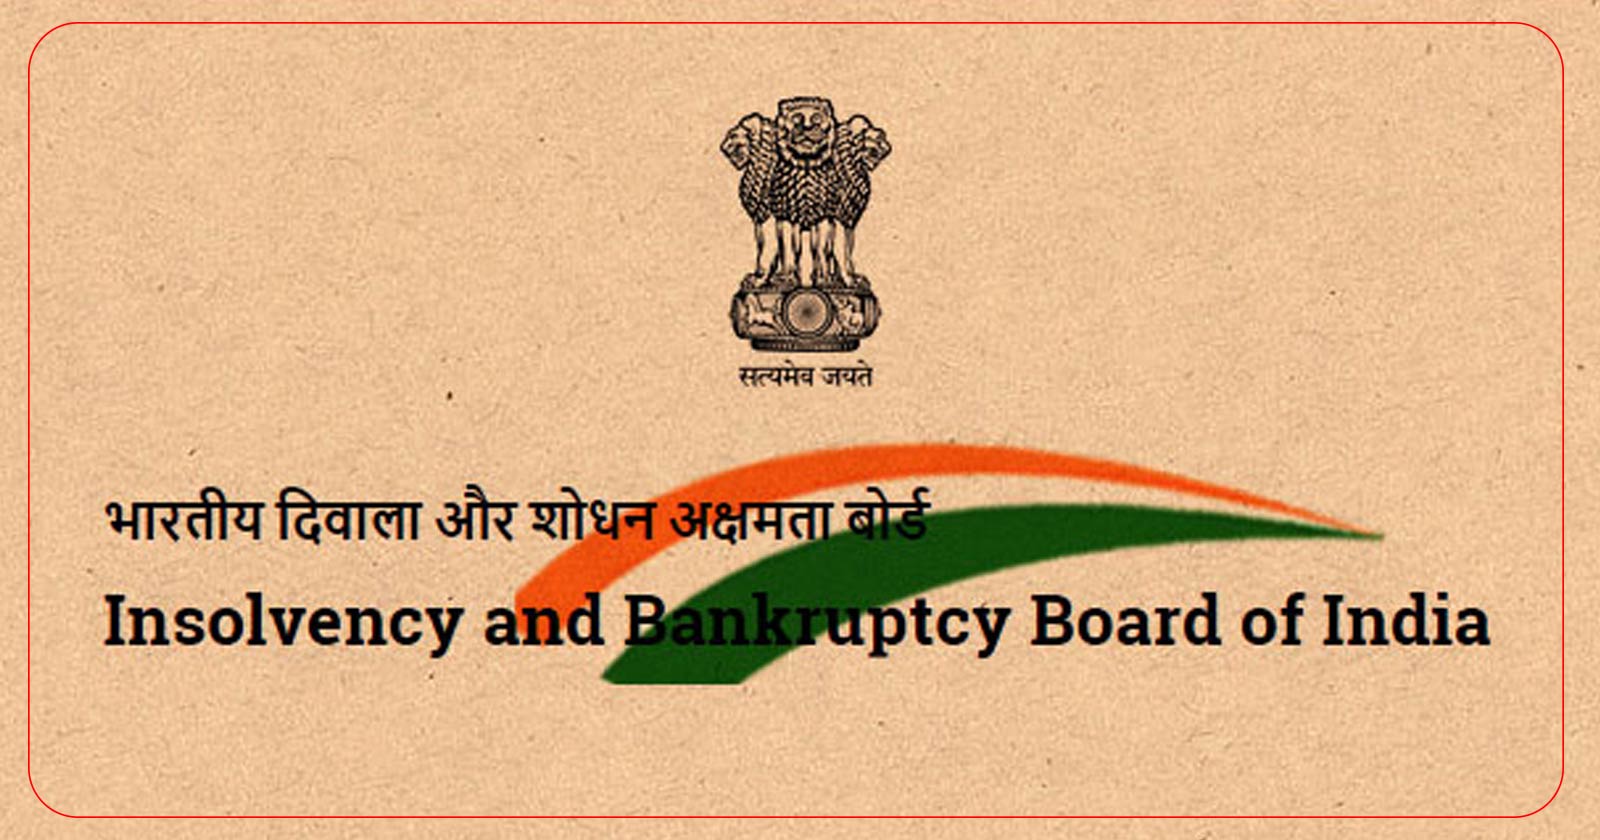 Custody and Control - Custody and Control of Assets - Assets - CD - IBBI - IBBI Suspends Registration of IP - IBBI Suspends Registration - Registration of IP - taxscan